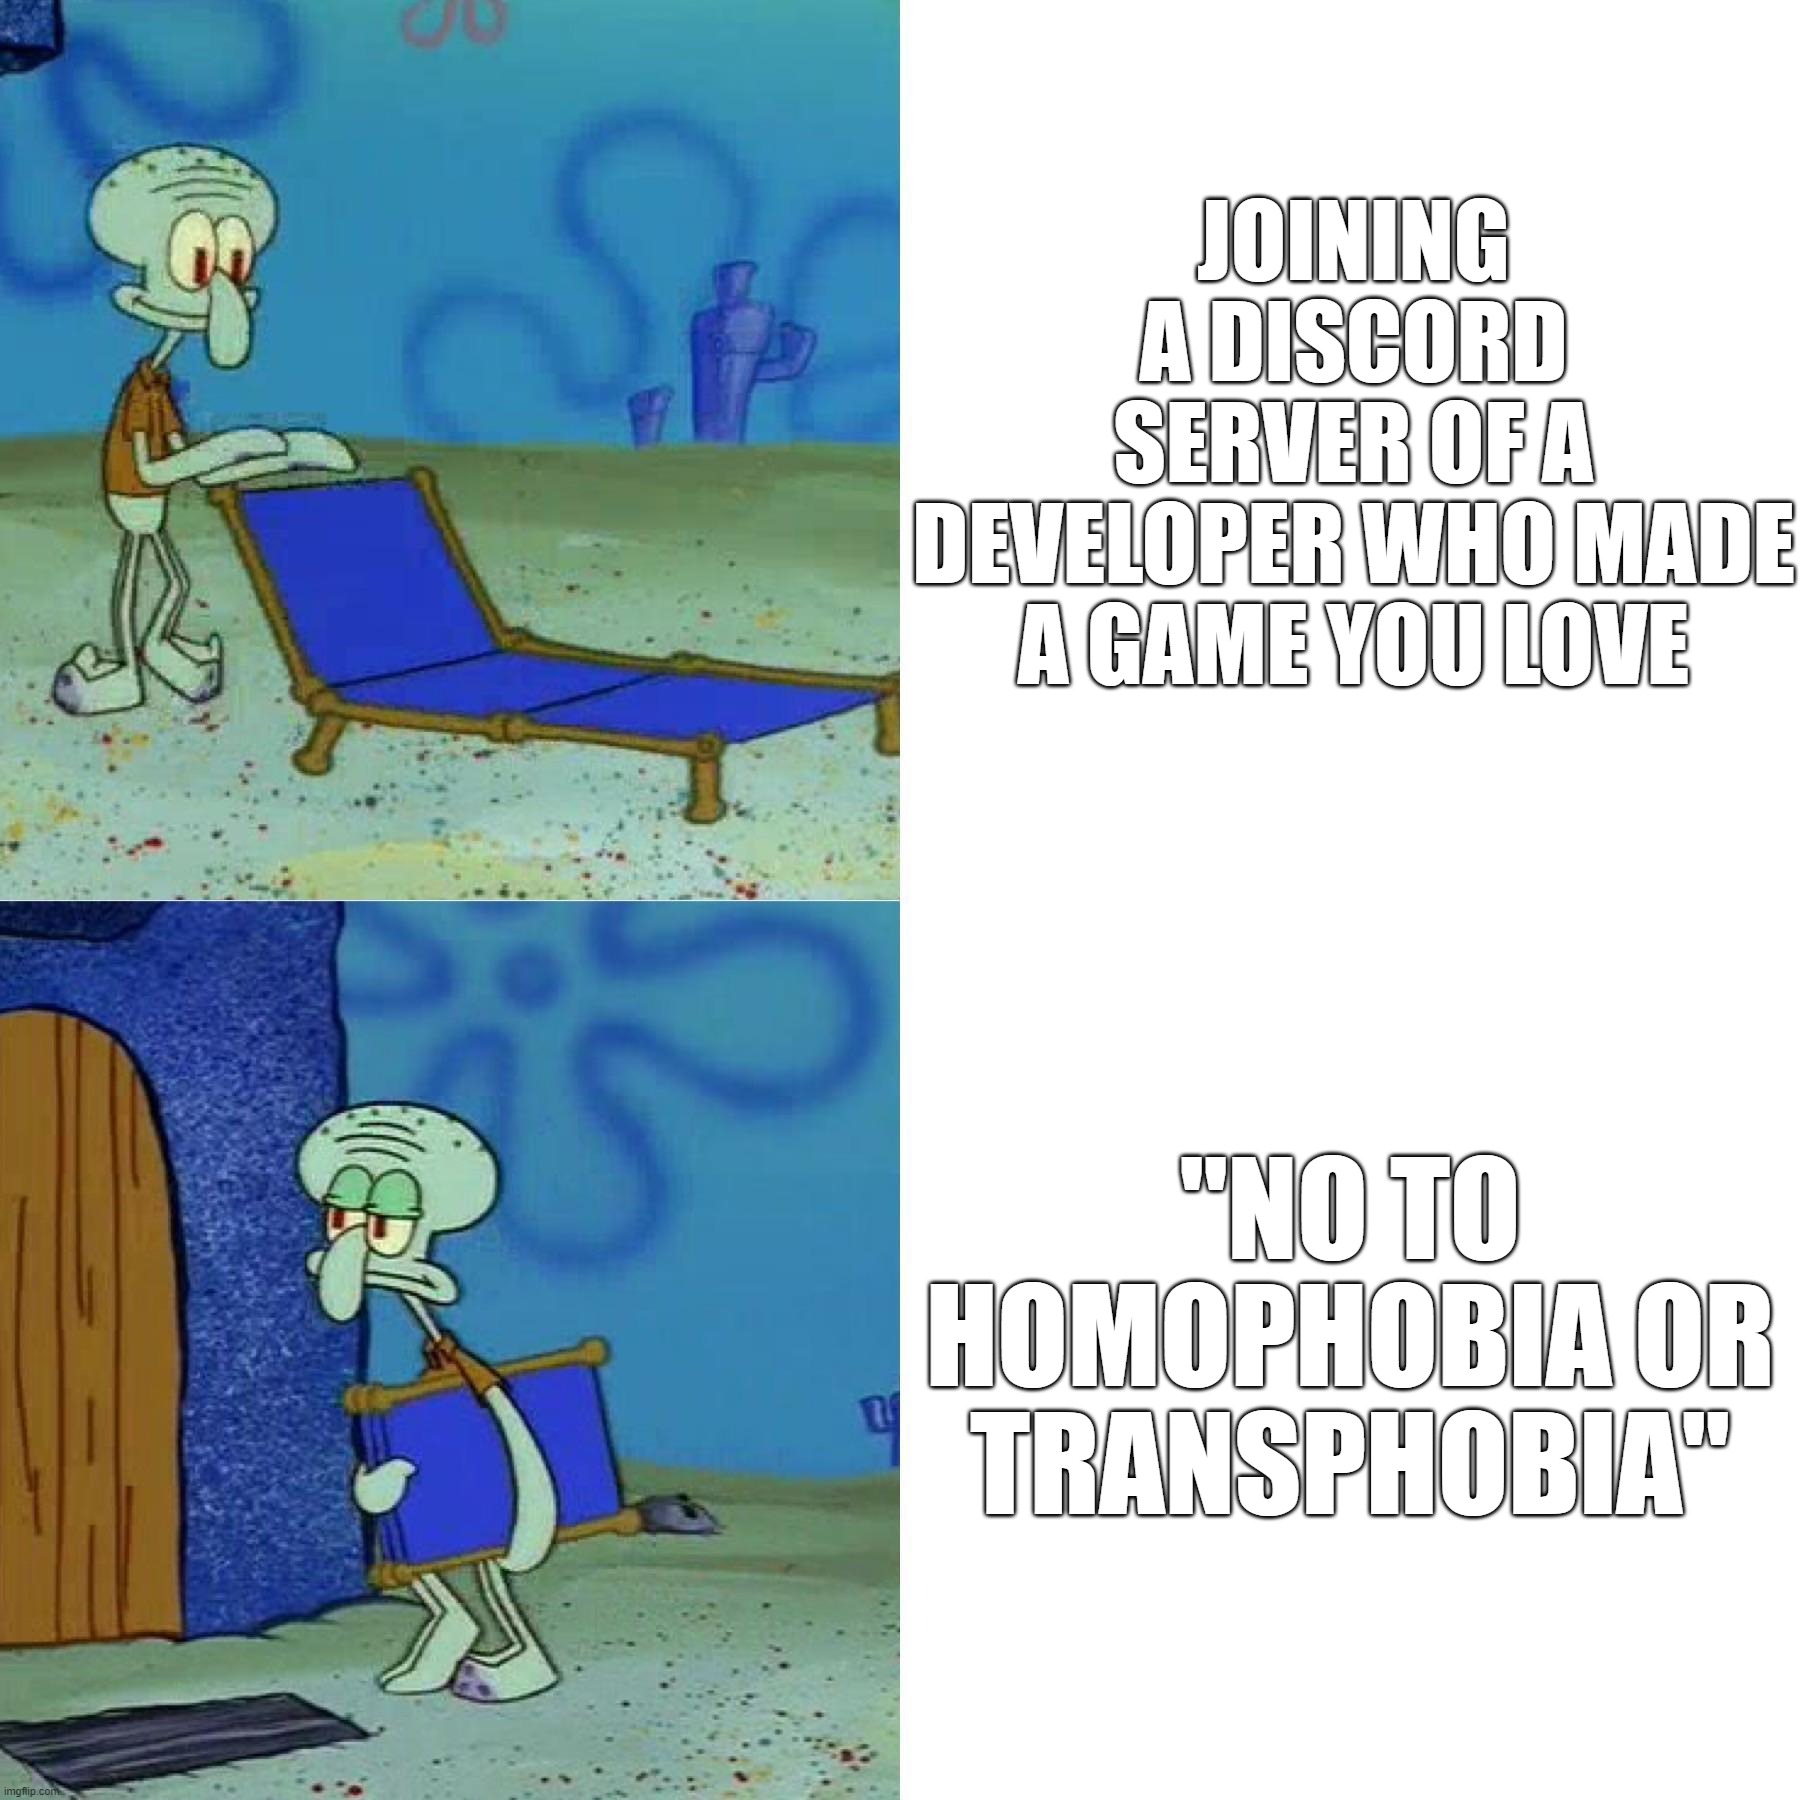 What's Next? No to Pedophobia or Satanophobia? | JOINING A DISCORD
SERVER OF A DEVELOPER WHO MADE A GAME YOU LOVE; "NO TO HOMOPHOBIA OR TRANSPHOBIA" | image tagged in squidward chair,homophobic,homophobia,transphobic,video games,games | made w/ Imgflip meme maker